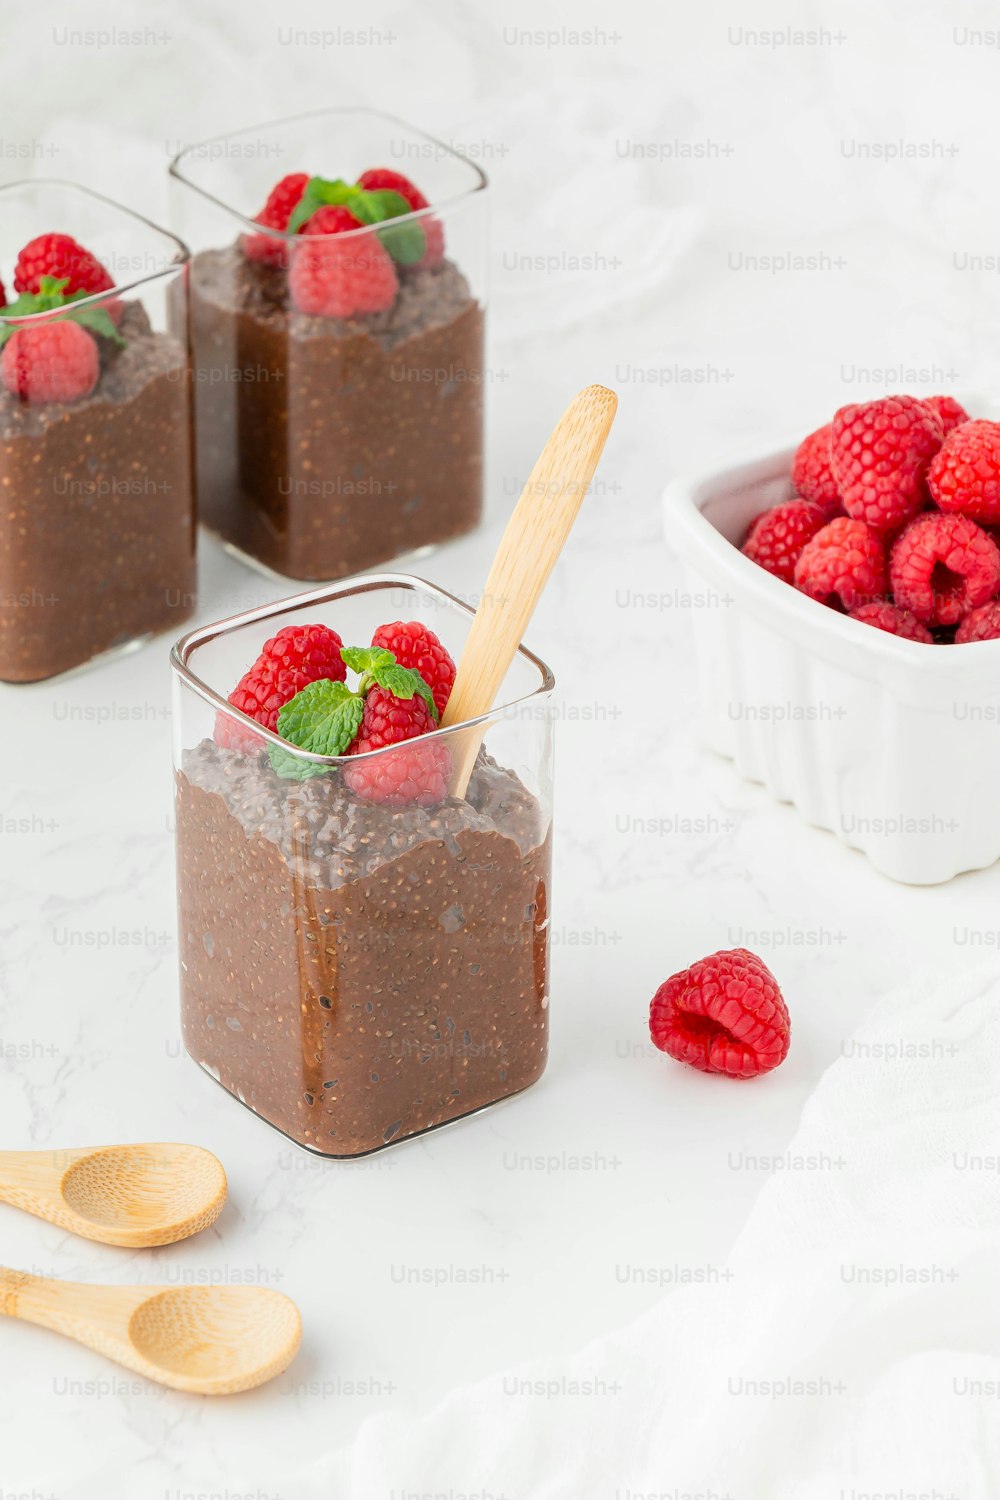 raspberries and chocolate pudding in small glass containers with spoons